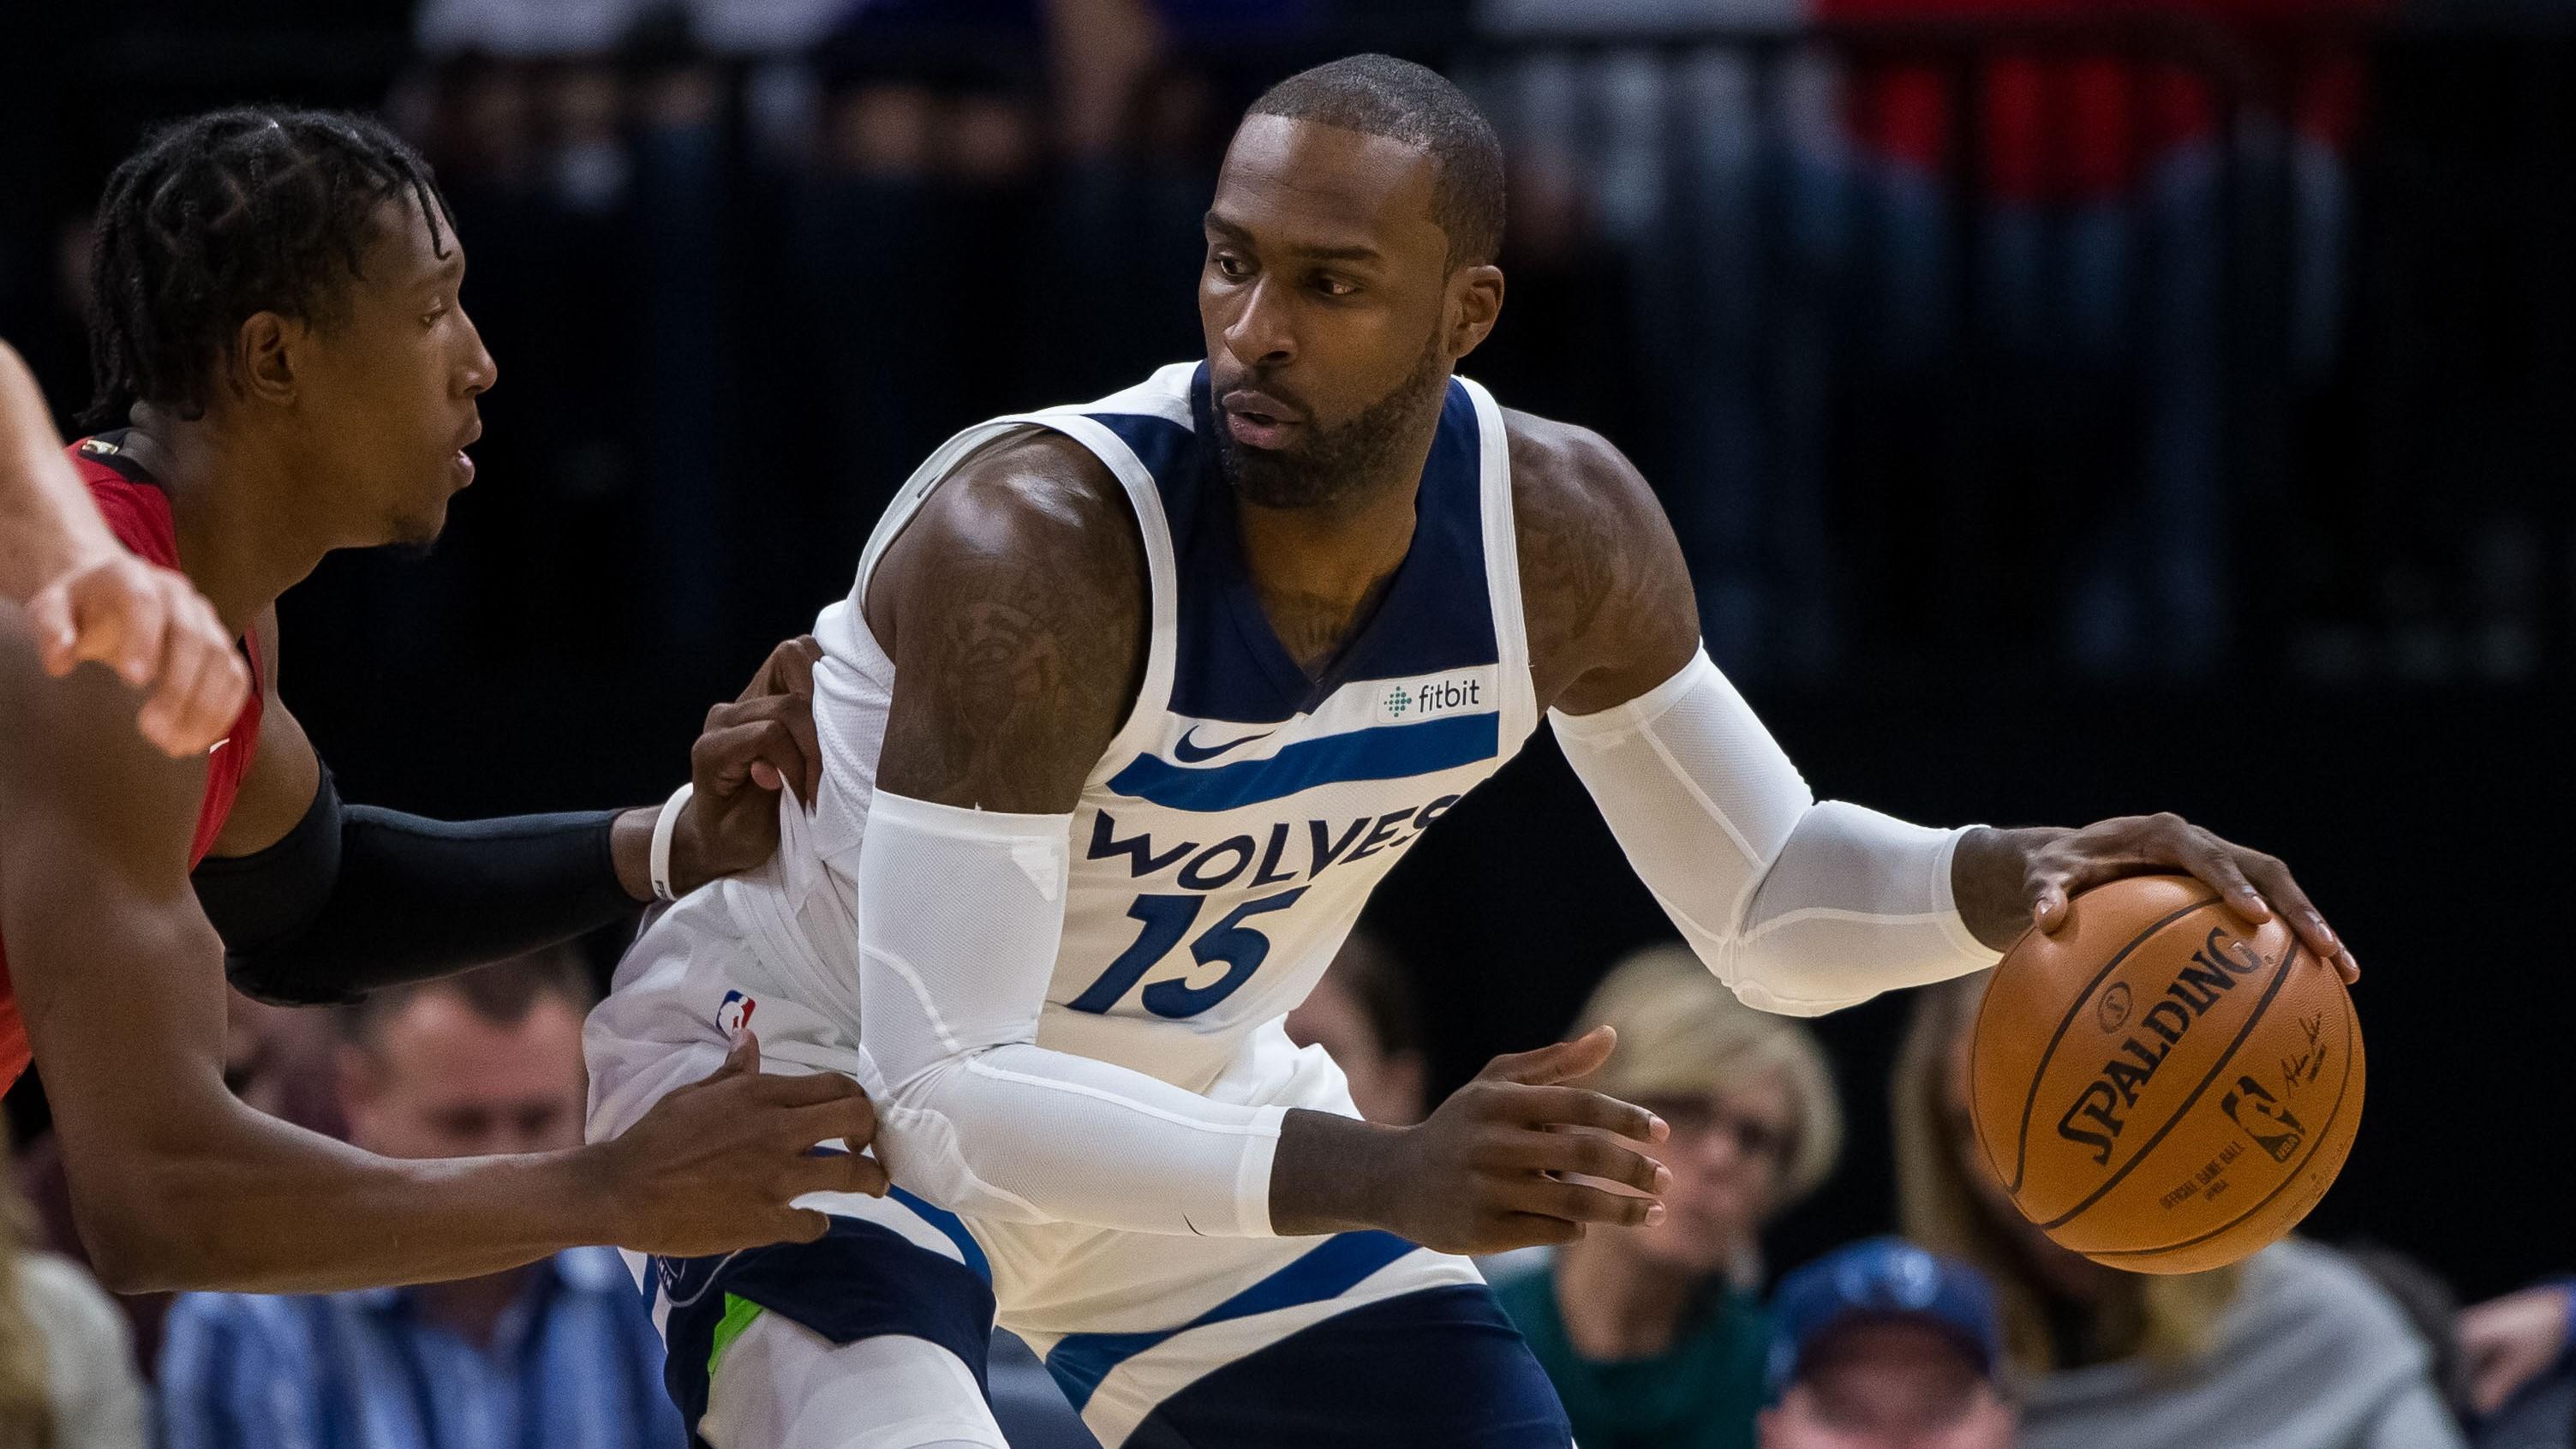 Nov 24, 2017; Minneapolis, MN, USA; Minnesota Timberwolves forward Shabazz Muhammad (15) dribbles in the second quarter against the Miami Heat at Target Center. / Brad Rempel-USA TODAY Sports